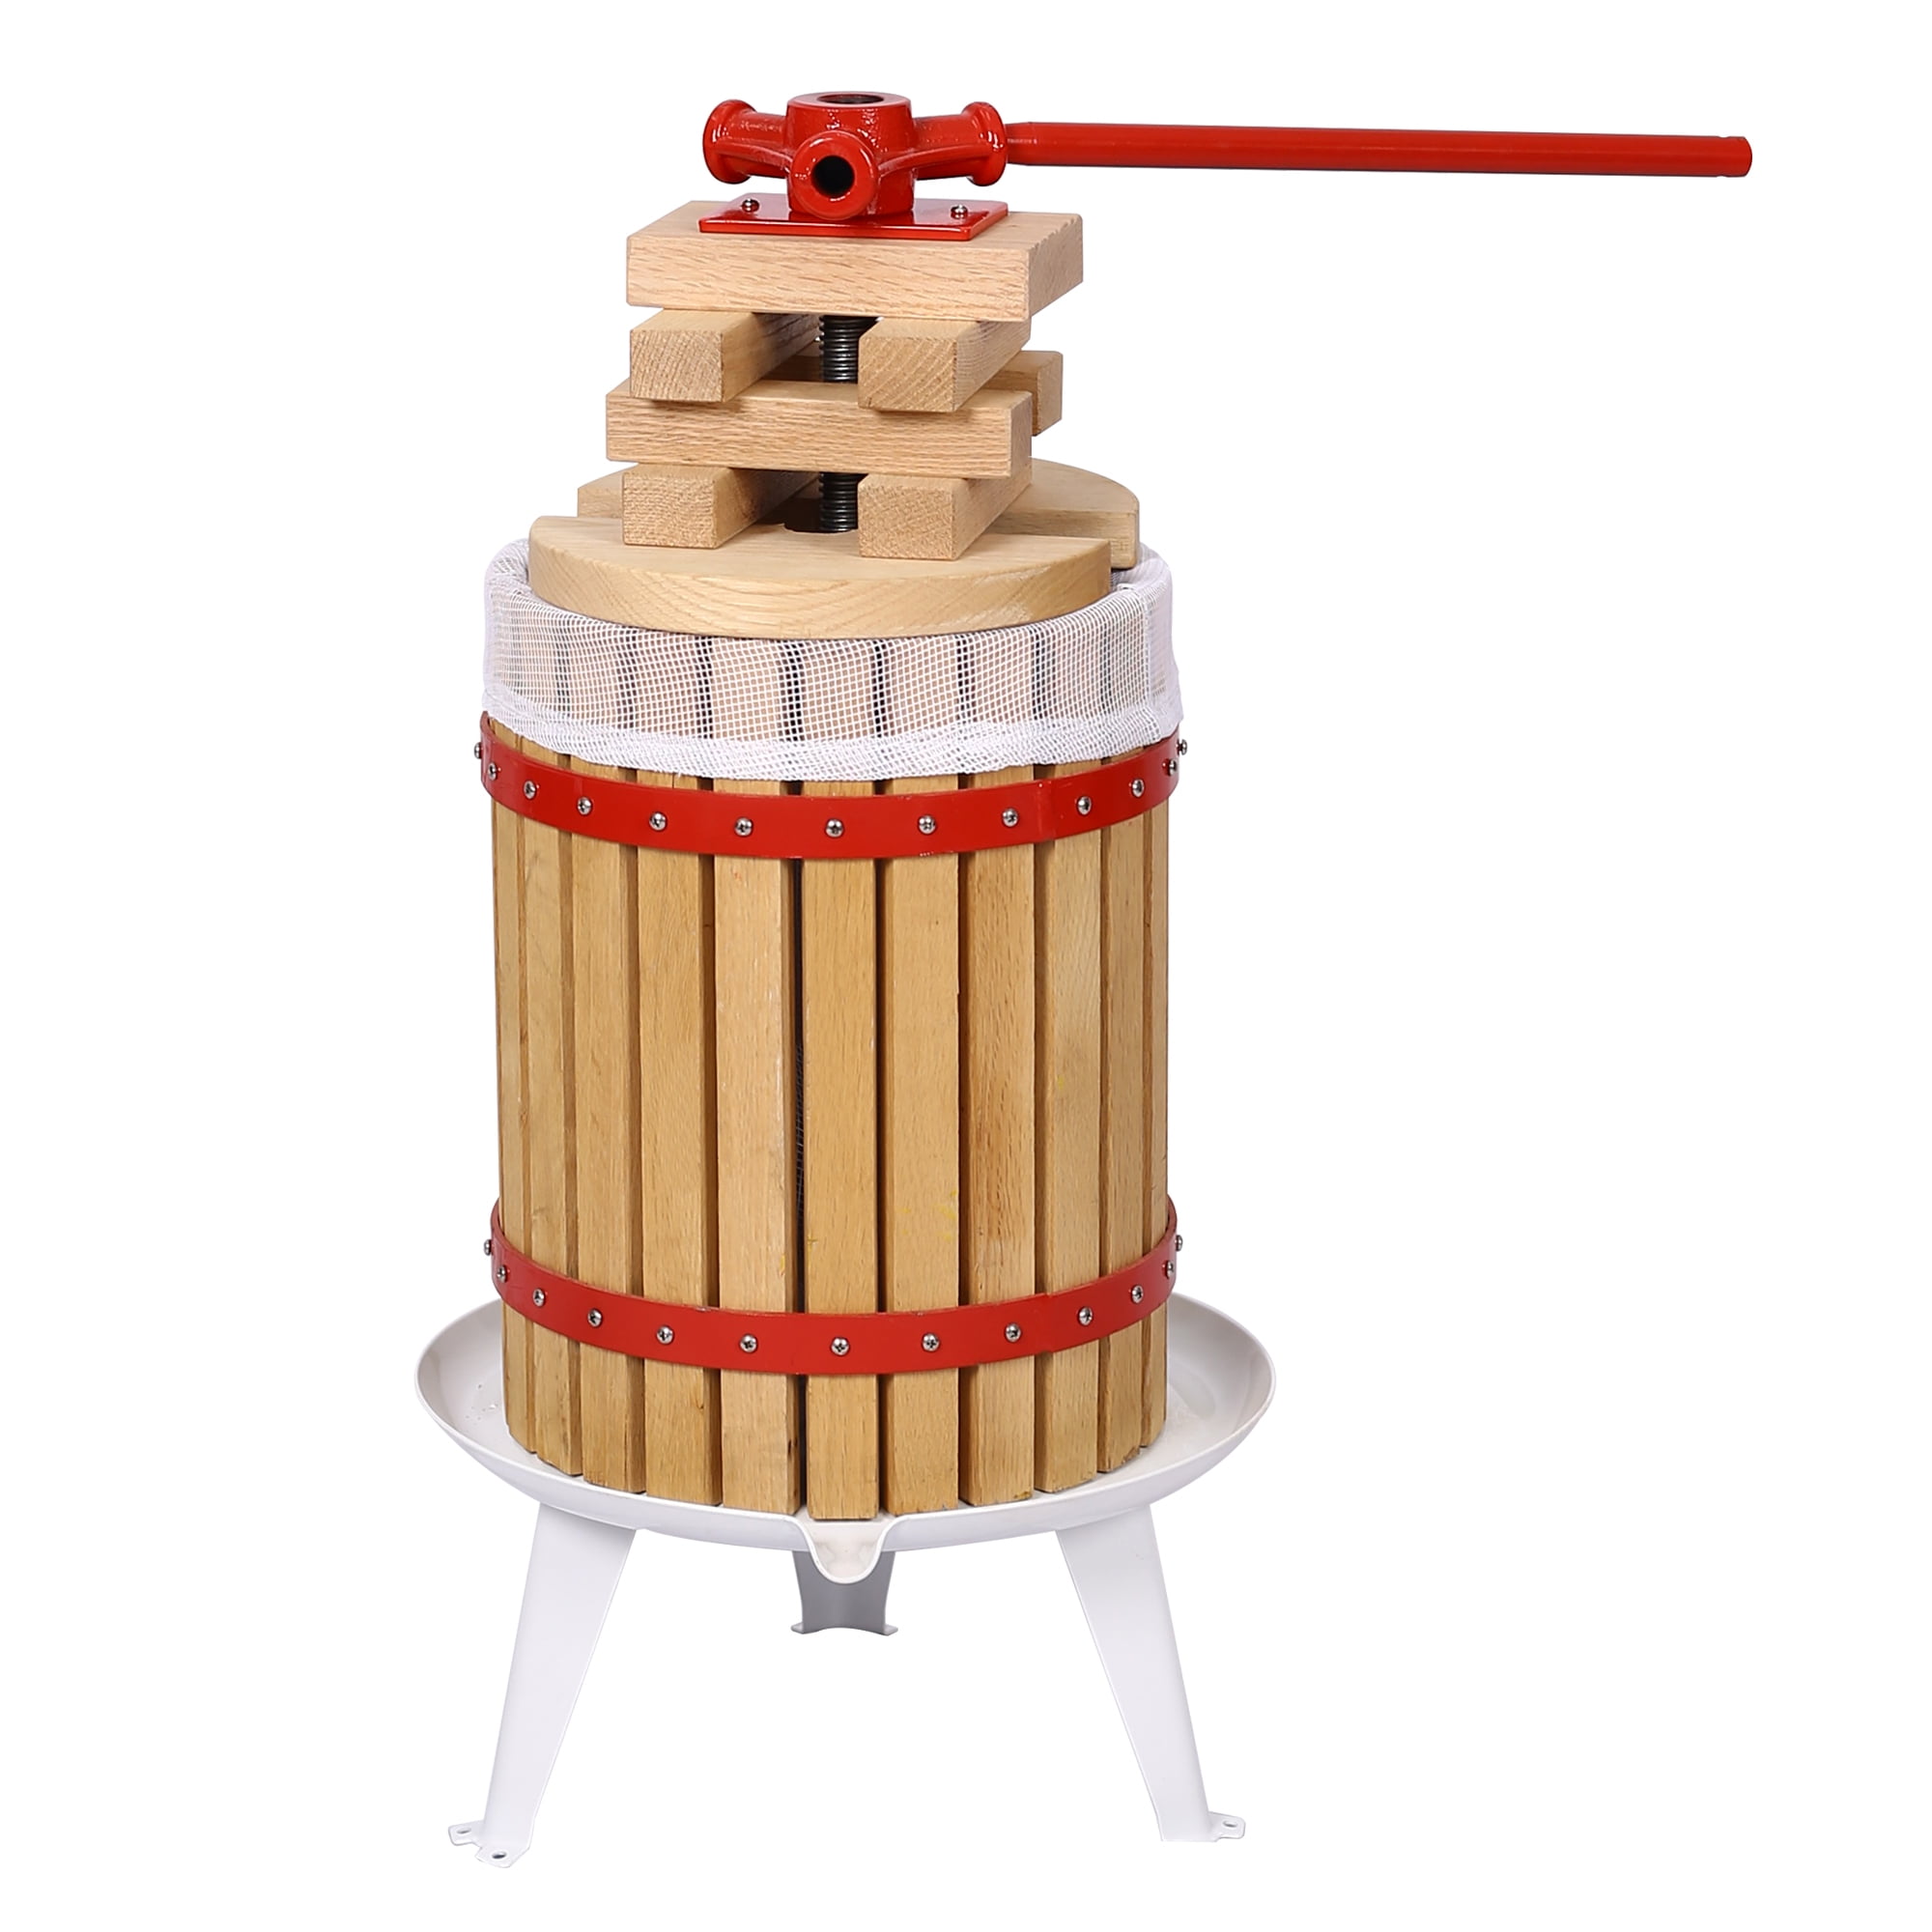 DealsOnline 18L Apple Press for Fruit Cider Berry Wine Make Your Own Home Brew Kitchen Garden Tool 